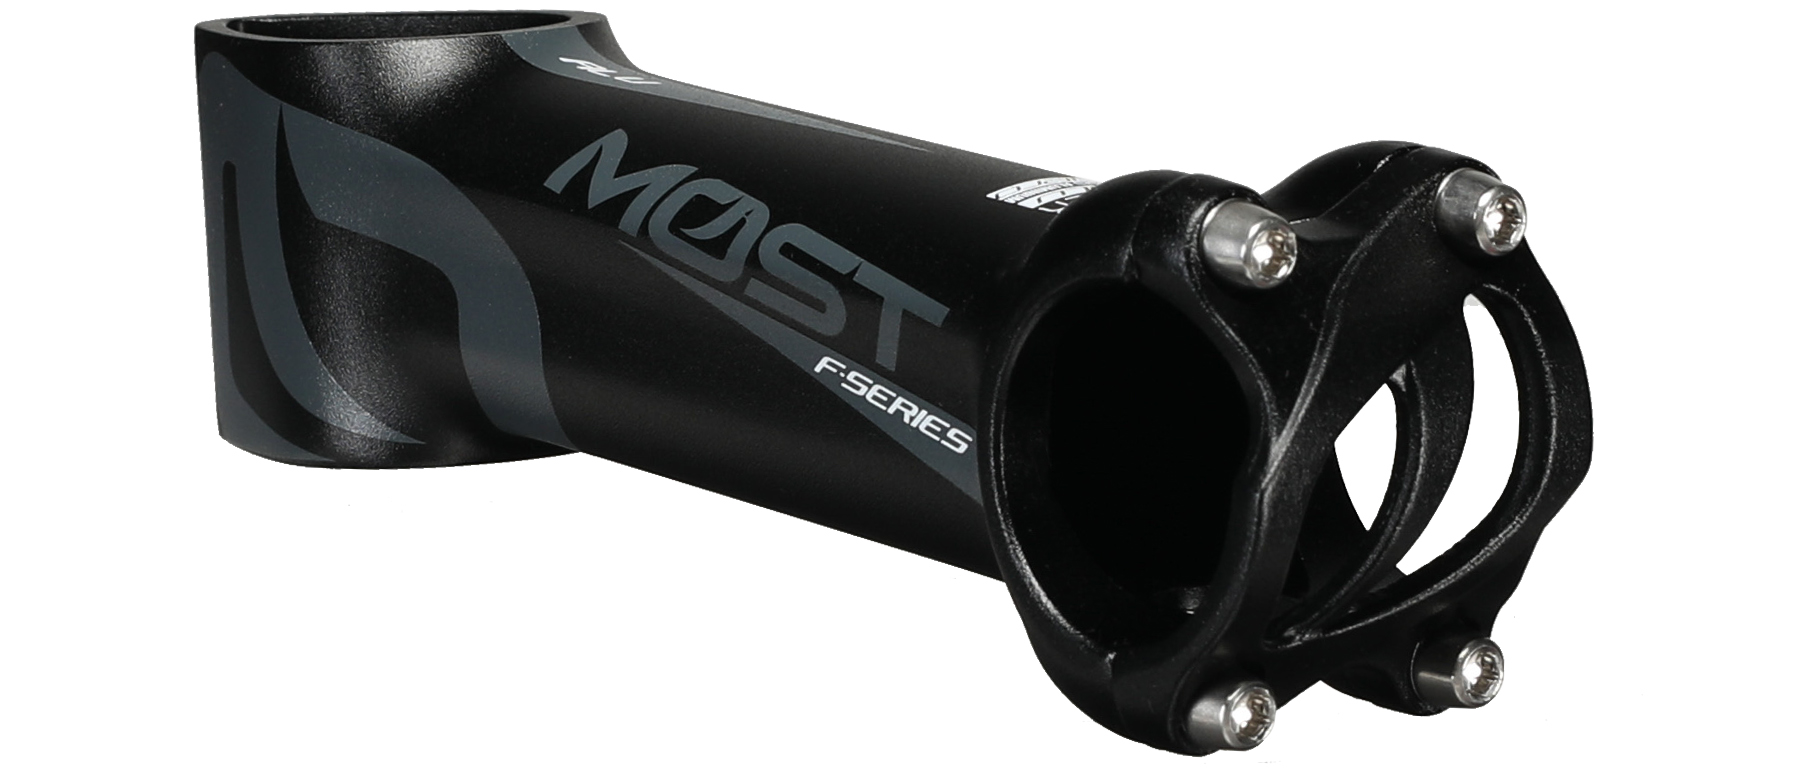 Most Tiger Alu Aero Di2 Stem Excel Sports | Shop Online From